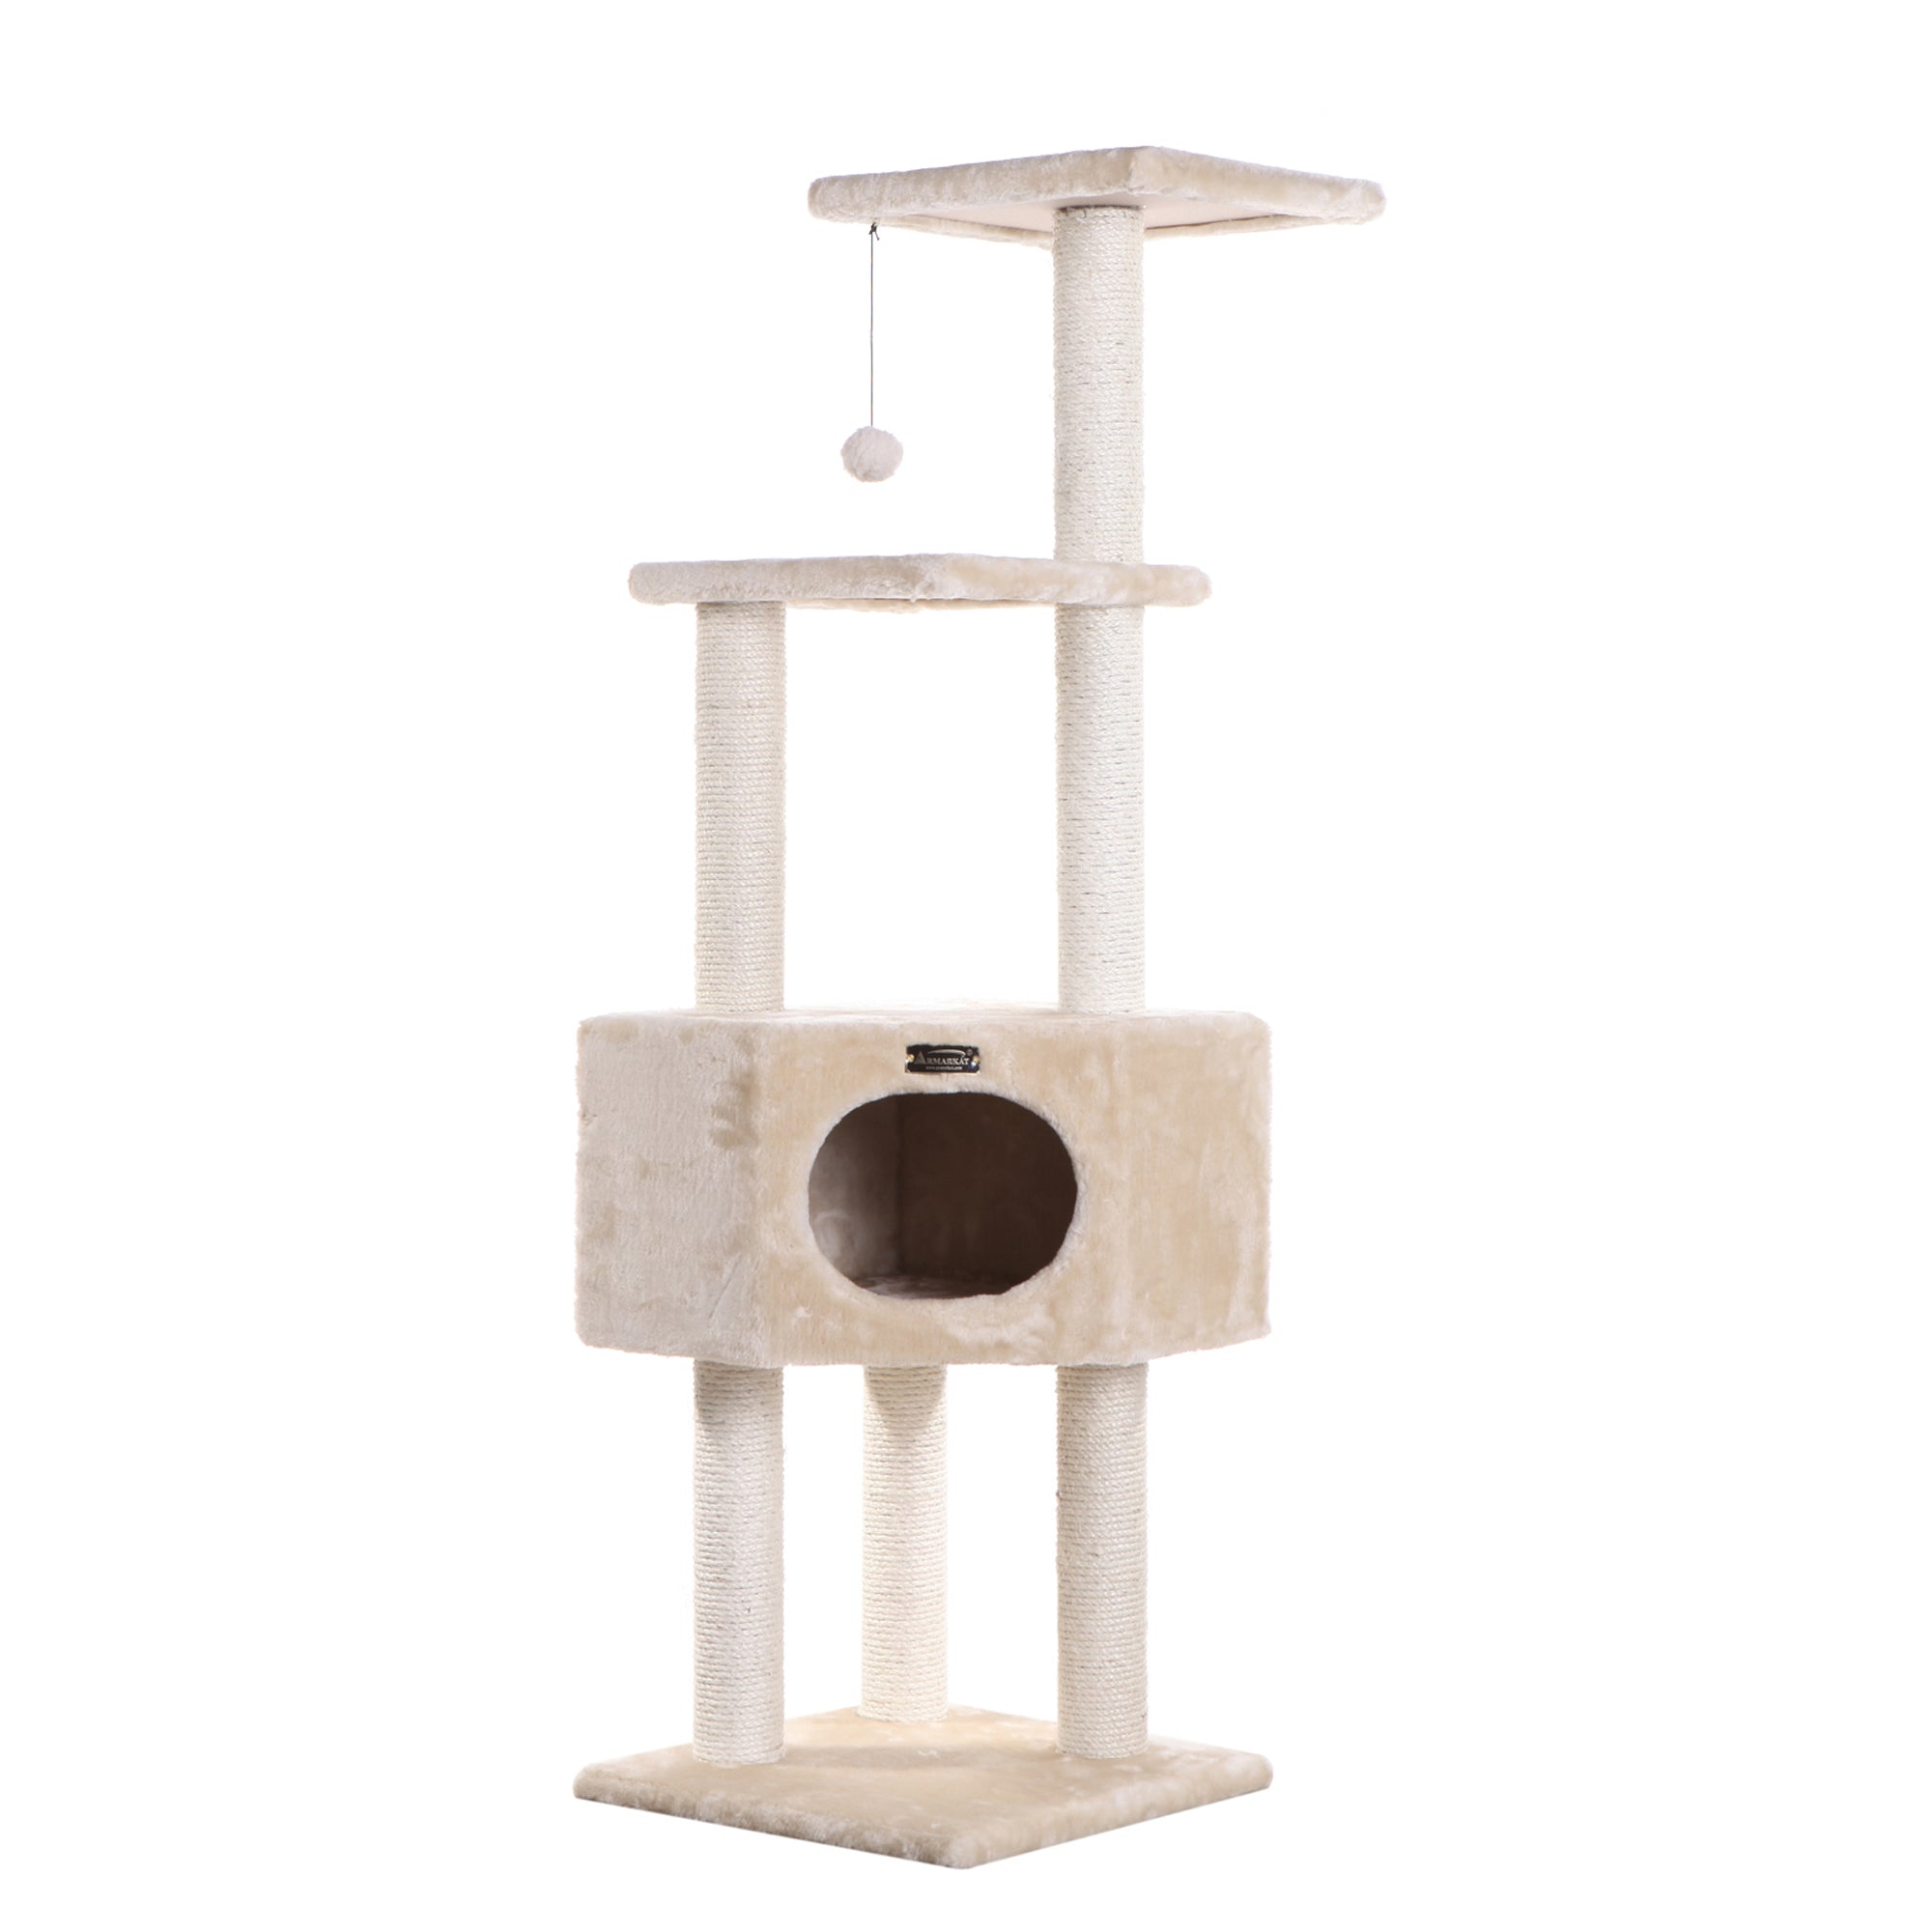 52-Inch 3 Tier Real Wood Cat Tree, Beige by Armarkat